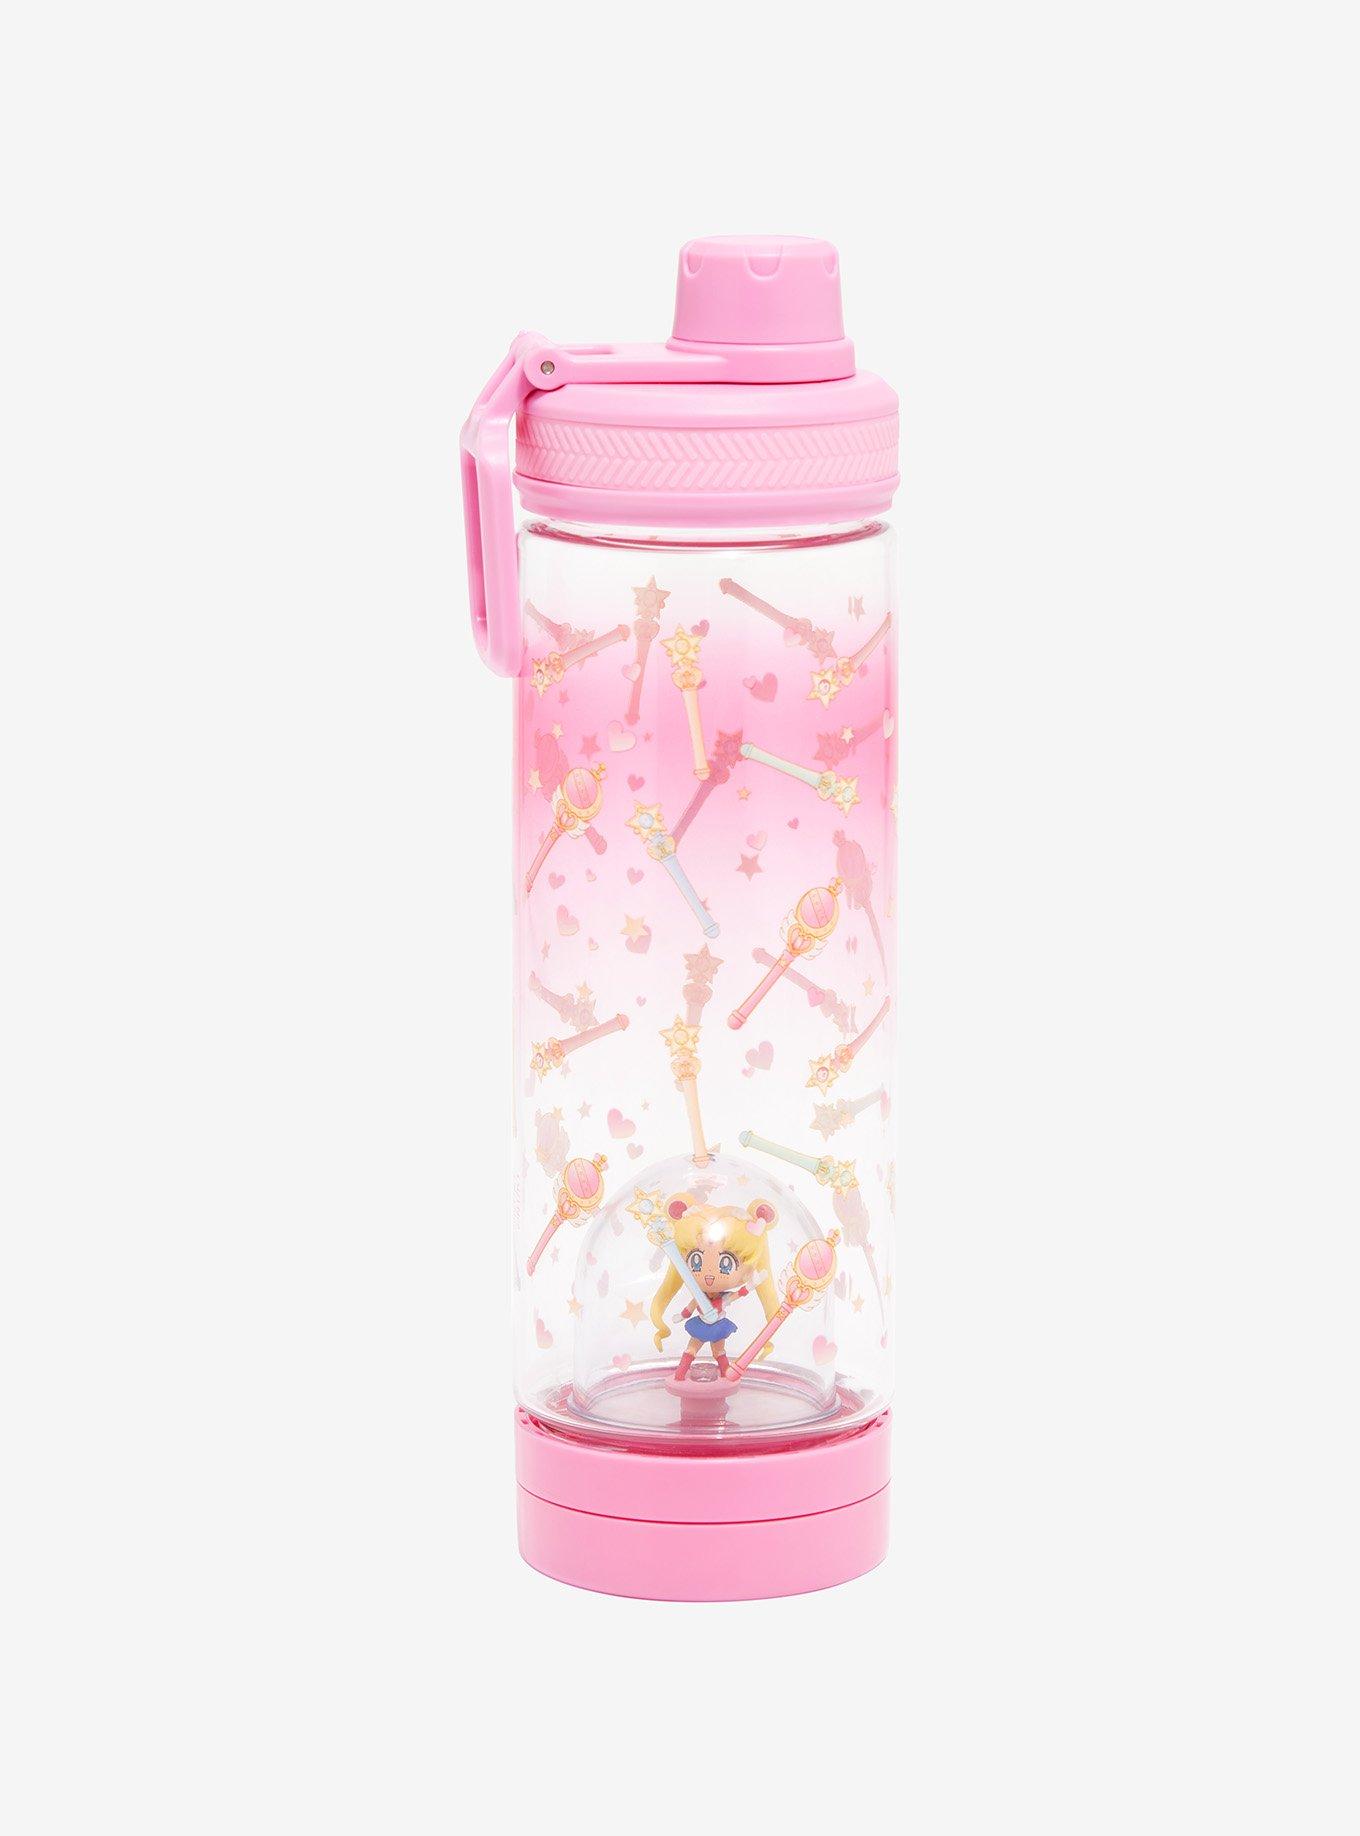 4 PACK !! ALADDIN 2-Way Lid WATER BOTTLE Pink WITH STRAW 30 oz BPA Free NEW